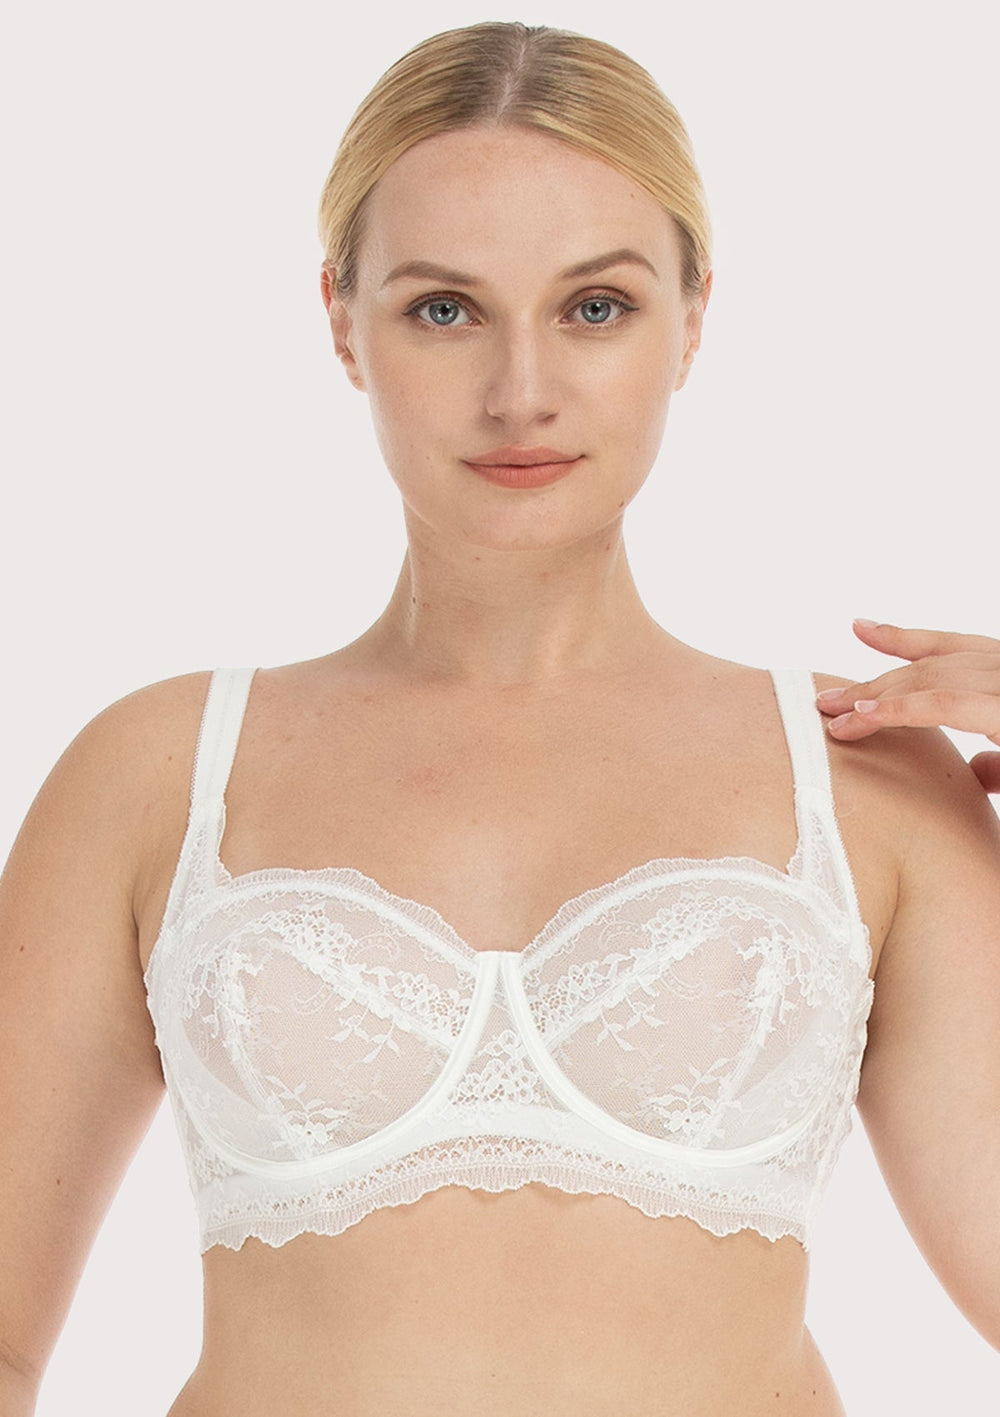 HSIA I Do Floral Lace Bridal Balconette Beautiful Bra for Special Day